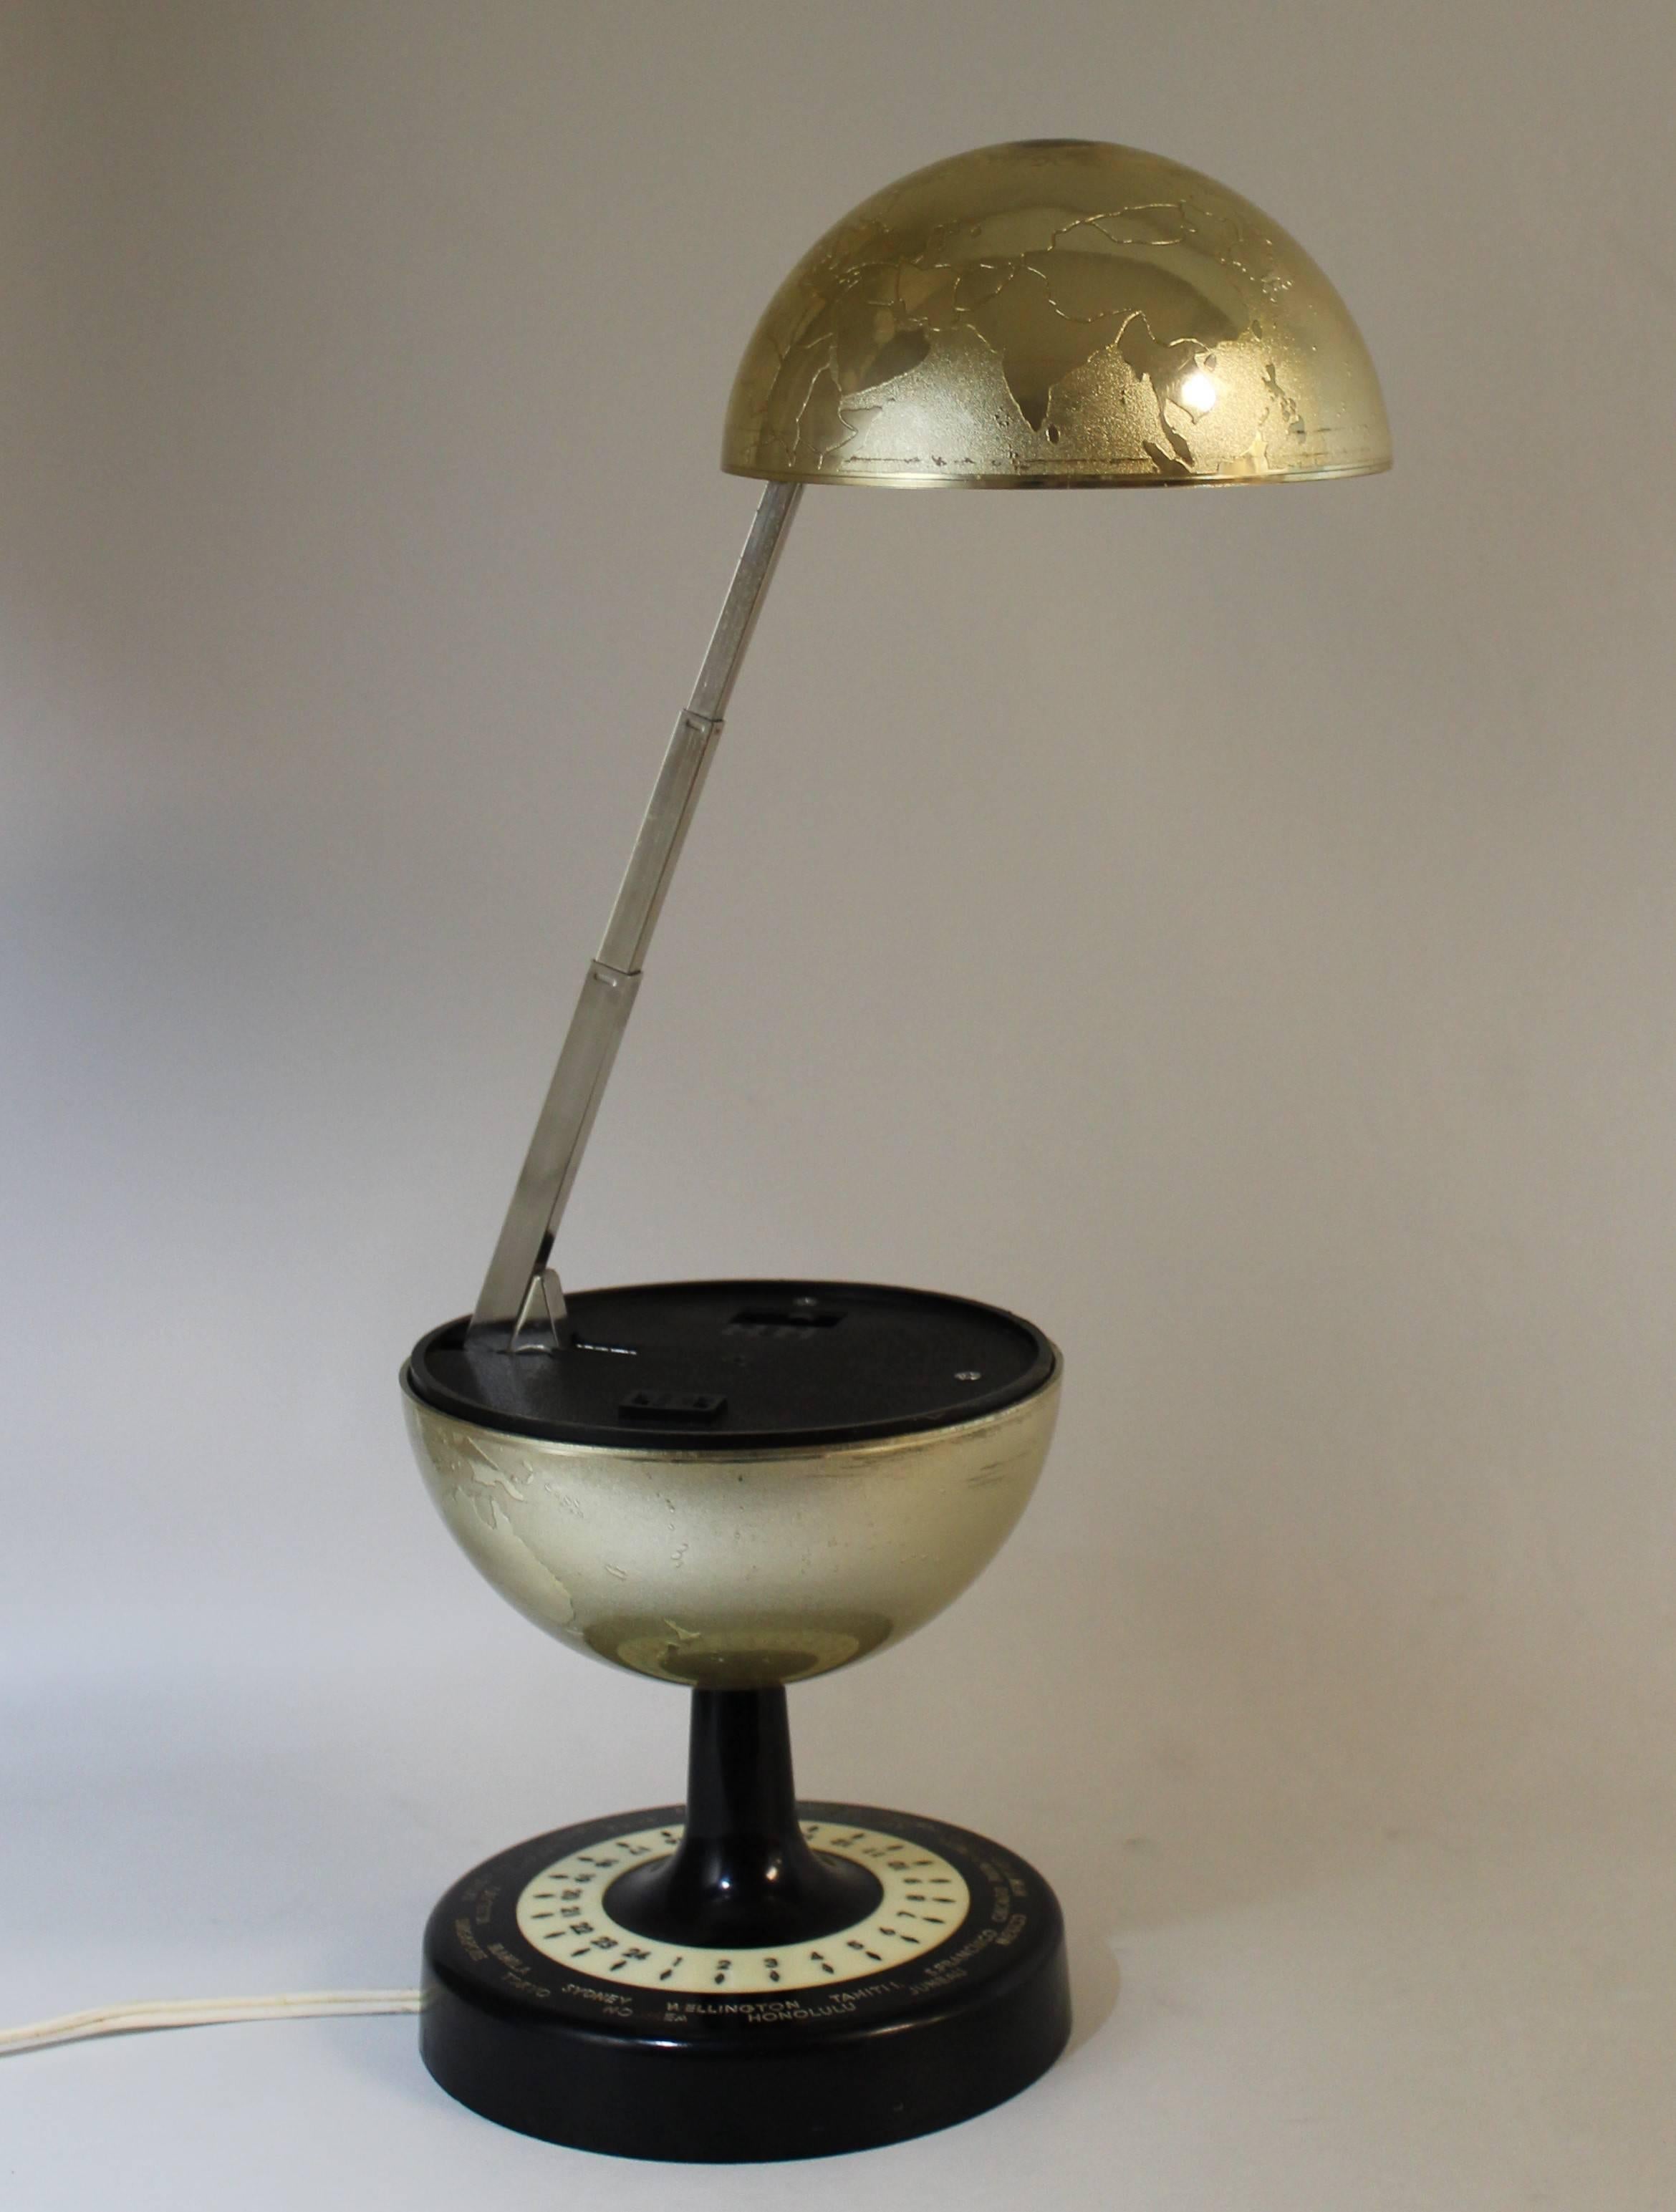 Mid-Century Modern articulating world globe lamp.
Made by Universal Lamp Co., Japan. The base rotates and shows the time differentials from cities across the world. The lamp extends to over 14 inches and the head adjusts to multiple positions.